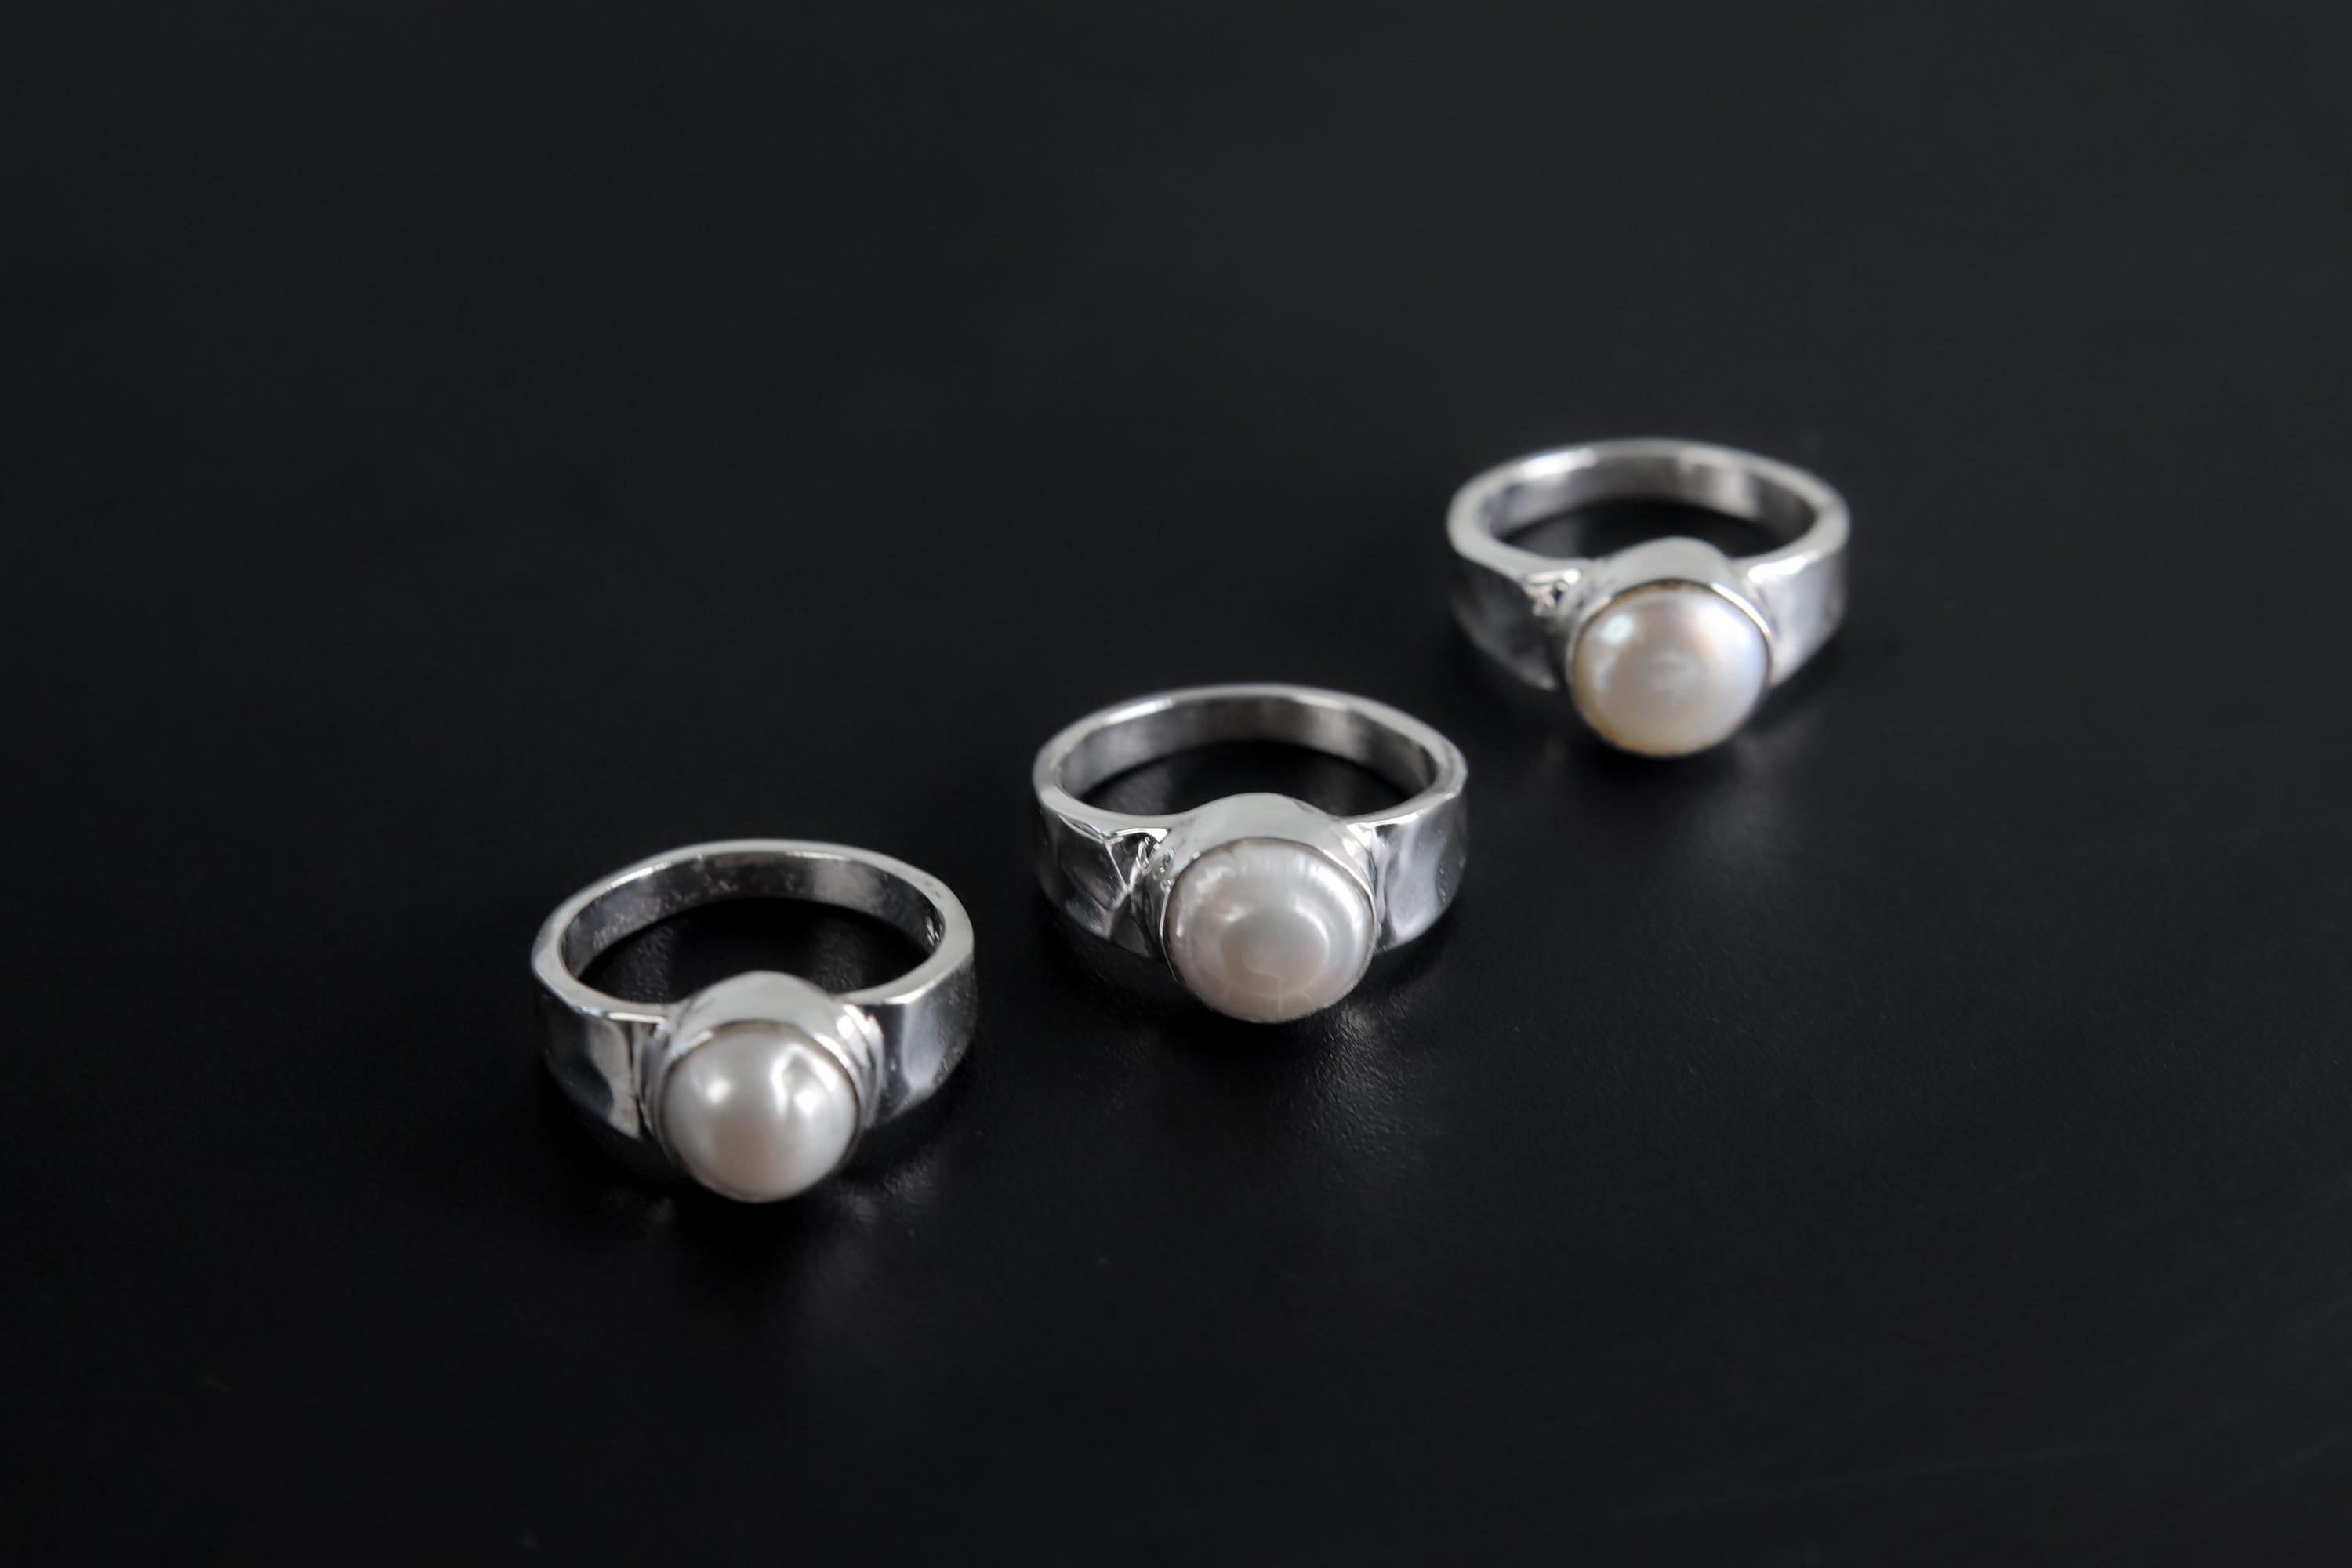 Large South Sea Pearl Ring - Hammered Band - 925 Sterling Silver Setting - Unisex - High Shine Polish - Enhances Calmness & Inner Wisdom